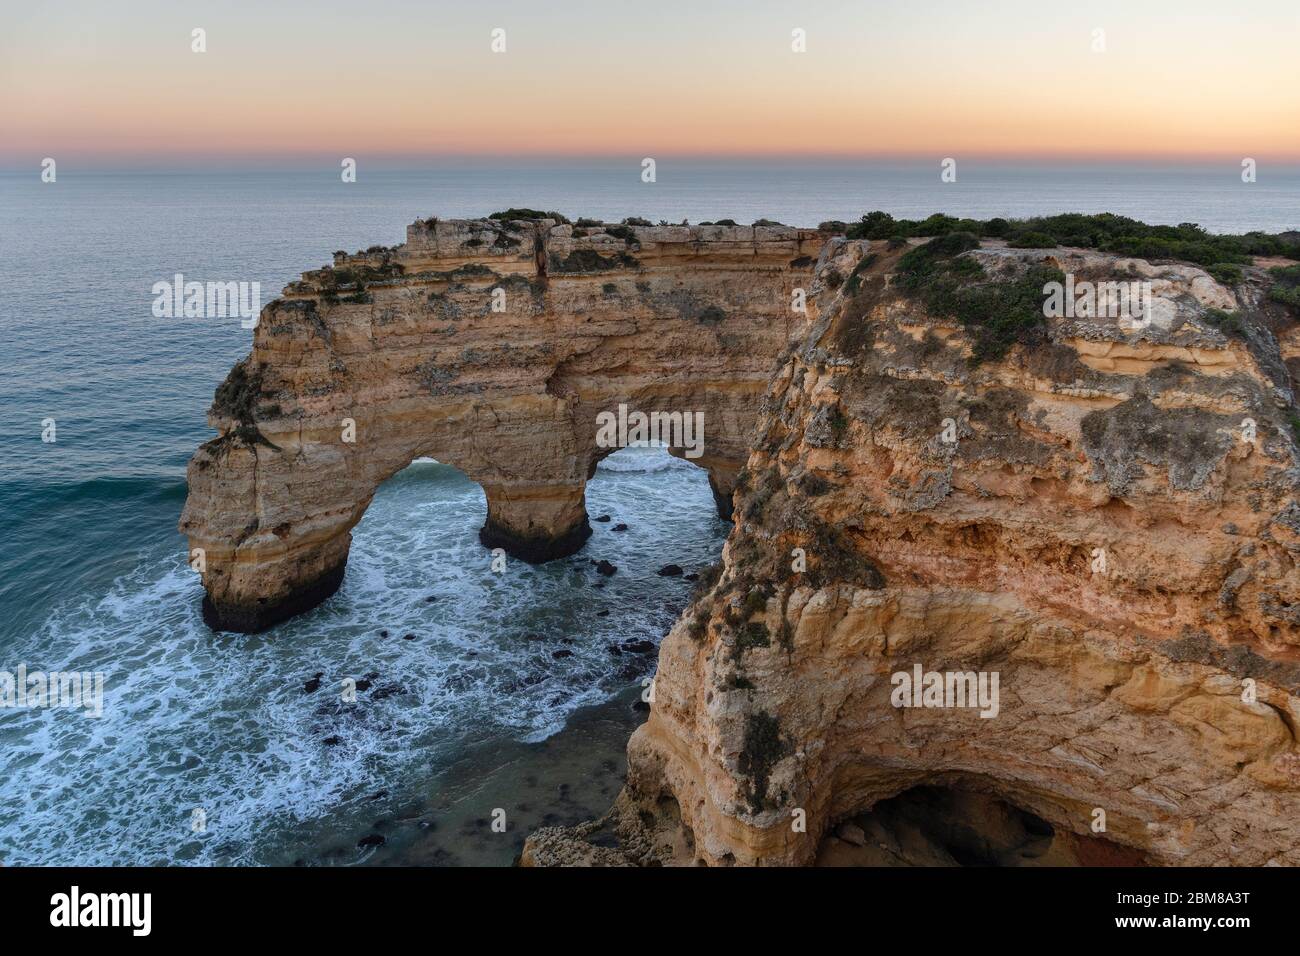 Amazing seascape at sunset at Marinha Beach in the Algarve, Portugal. Landscape with strong colors of one of the main holiday destinations in europe. Stock Photo